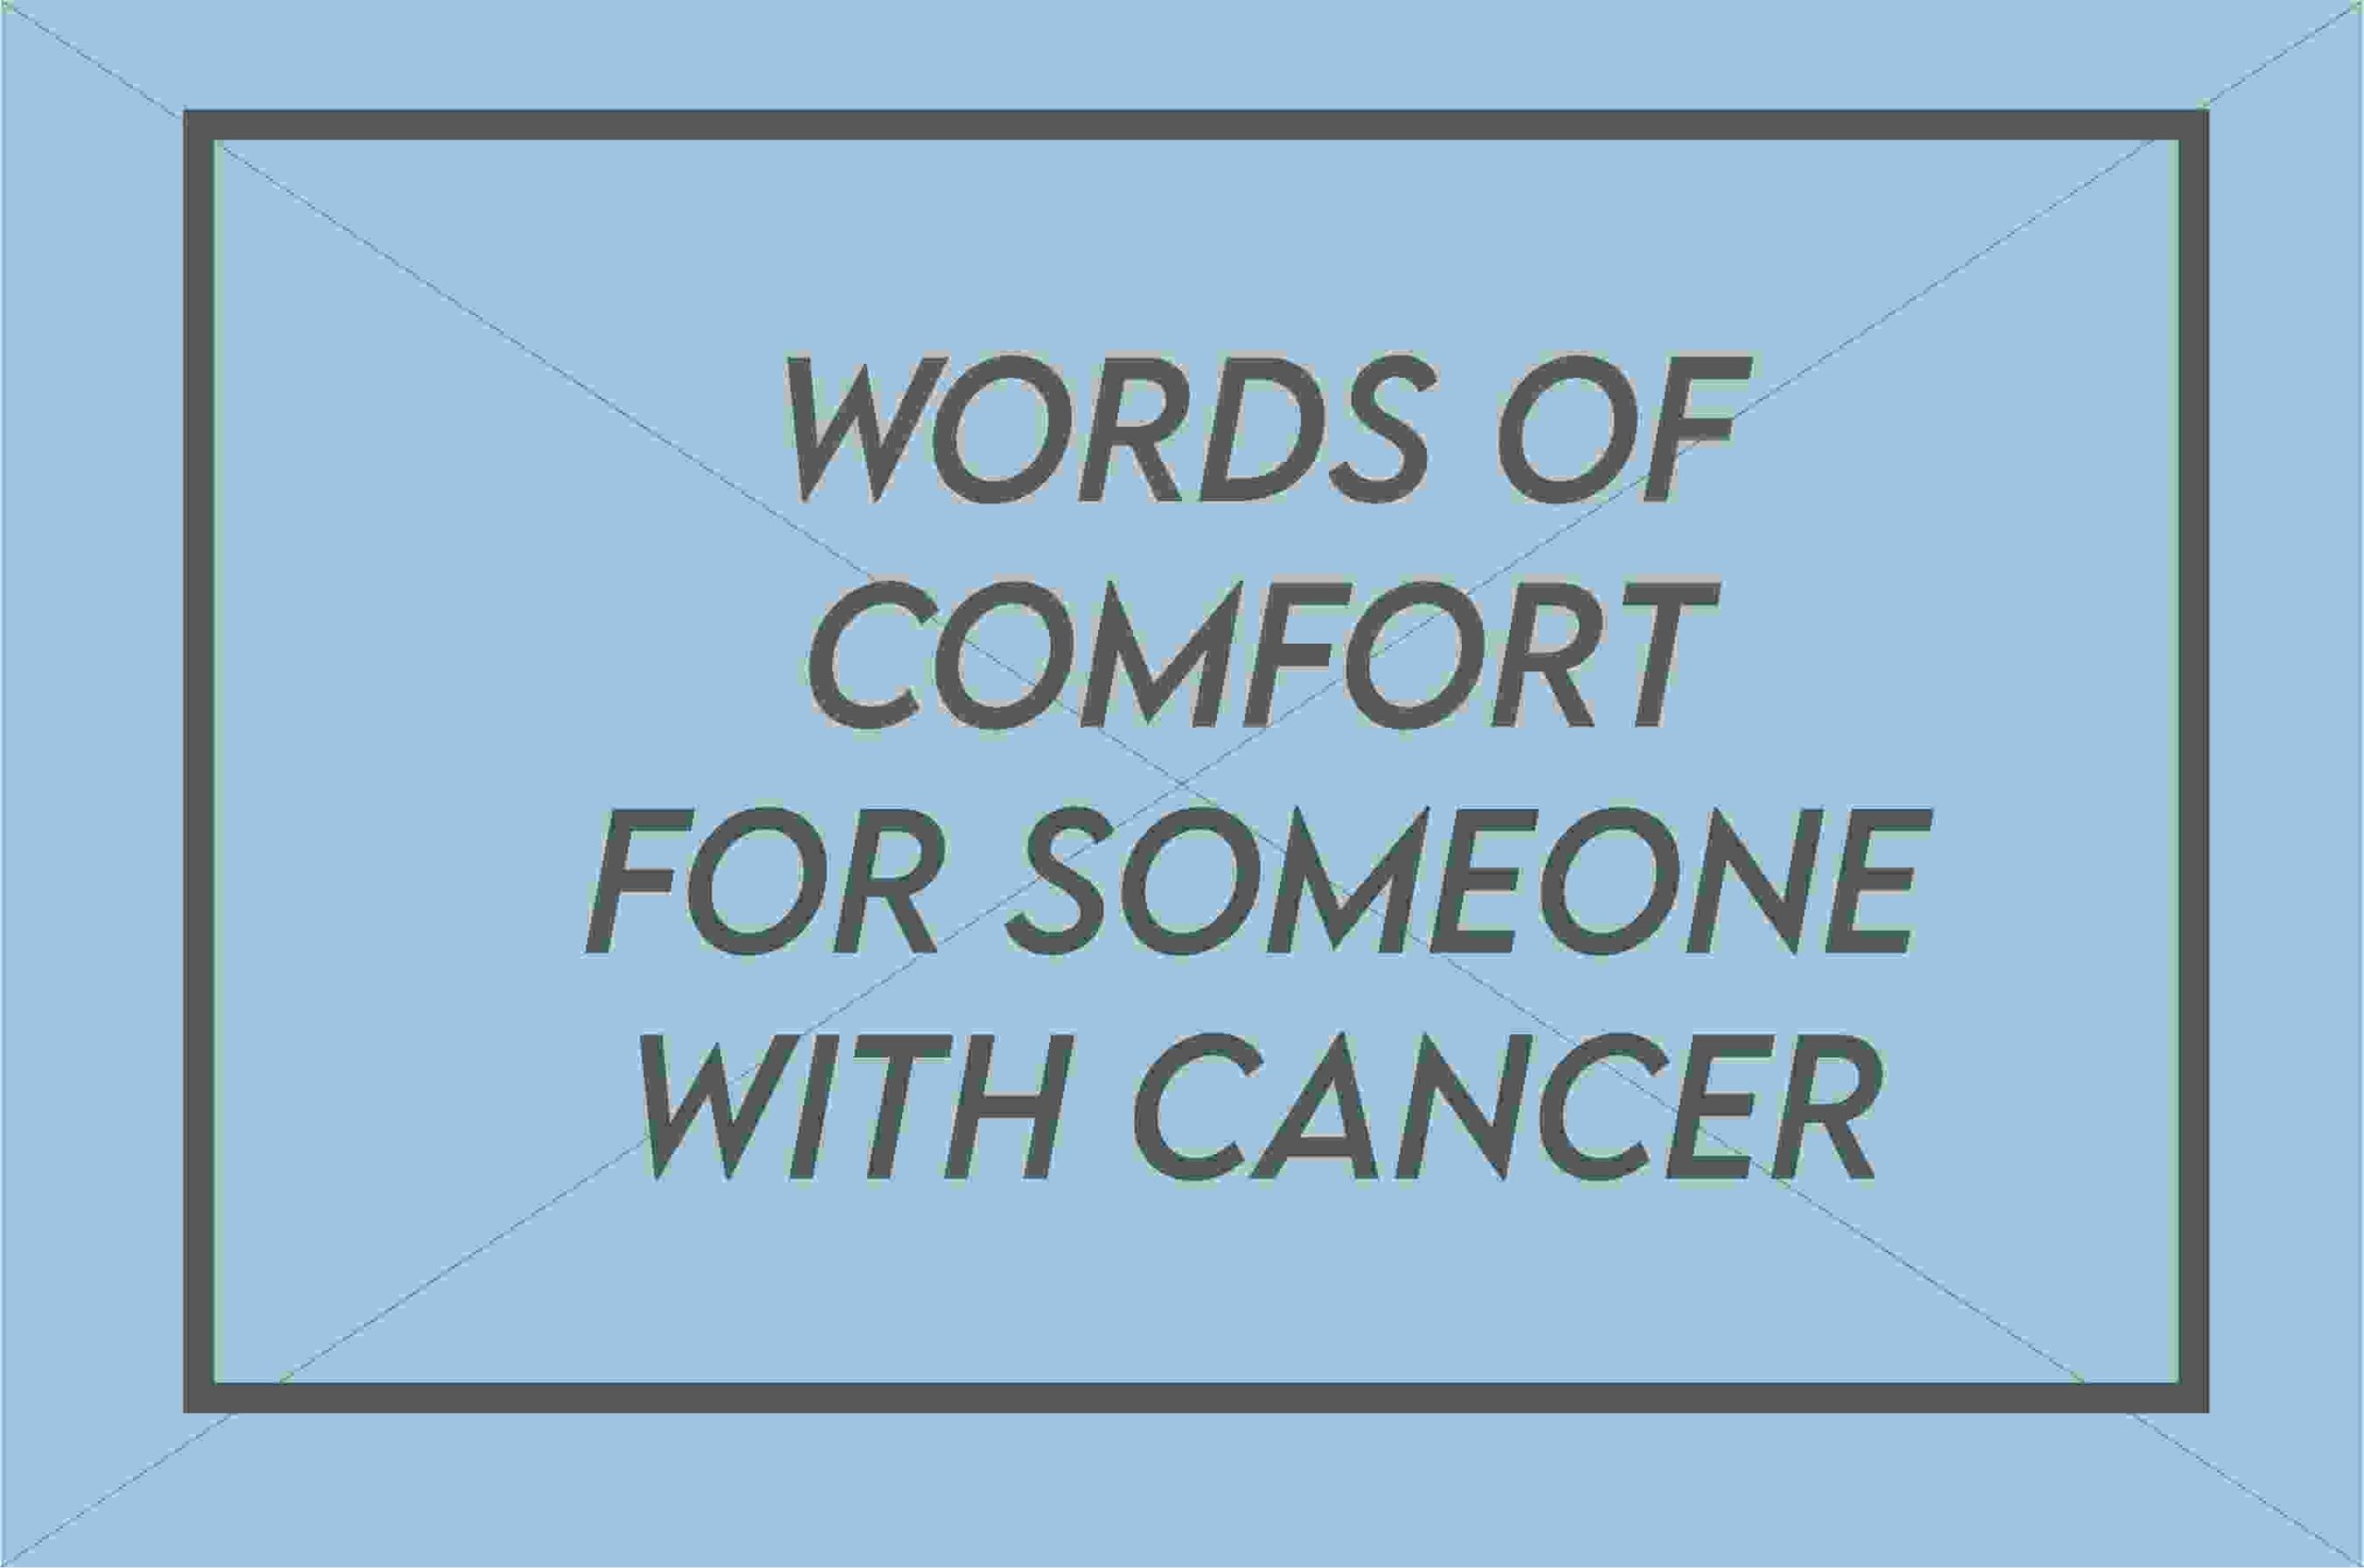 Comforting Words For Someone With Cancer